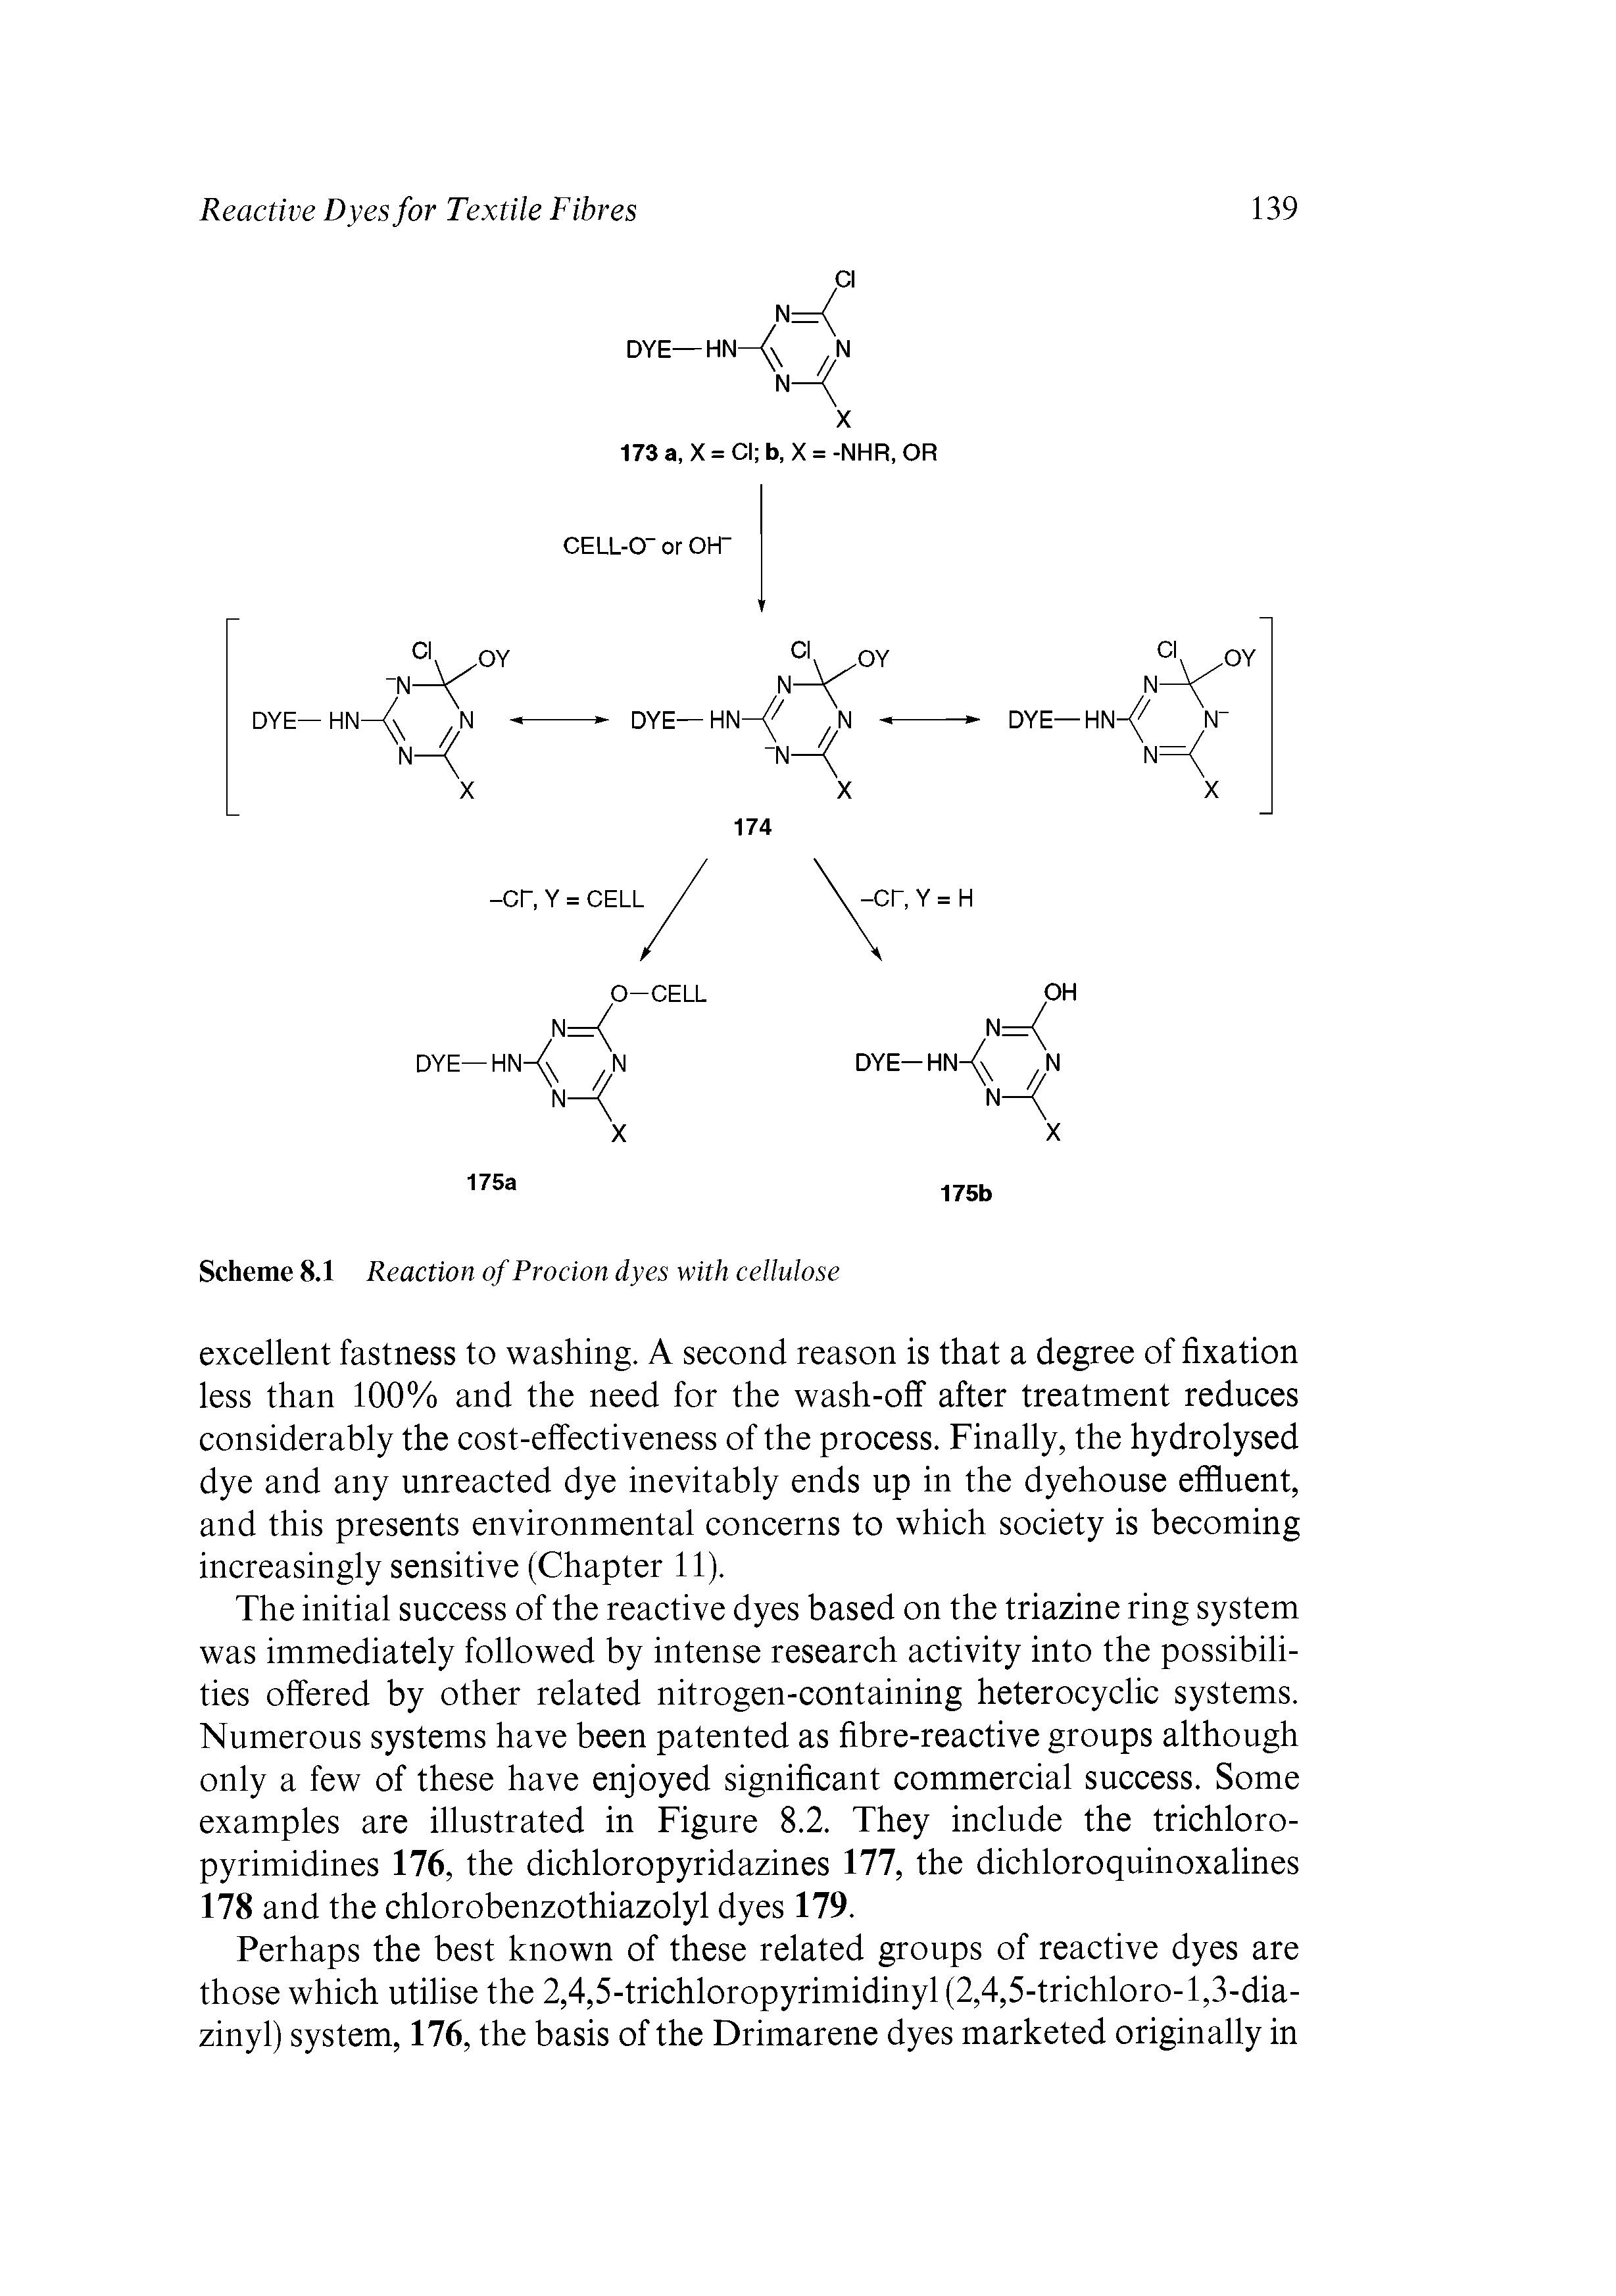 Scheme 8.1 Reaction of Procion dyes with cellulose...